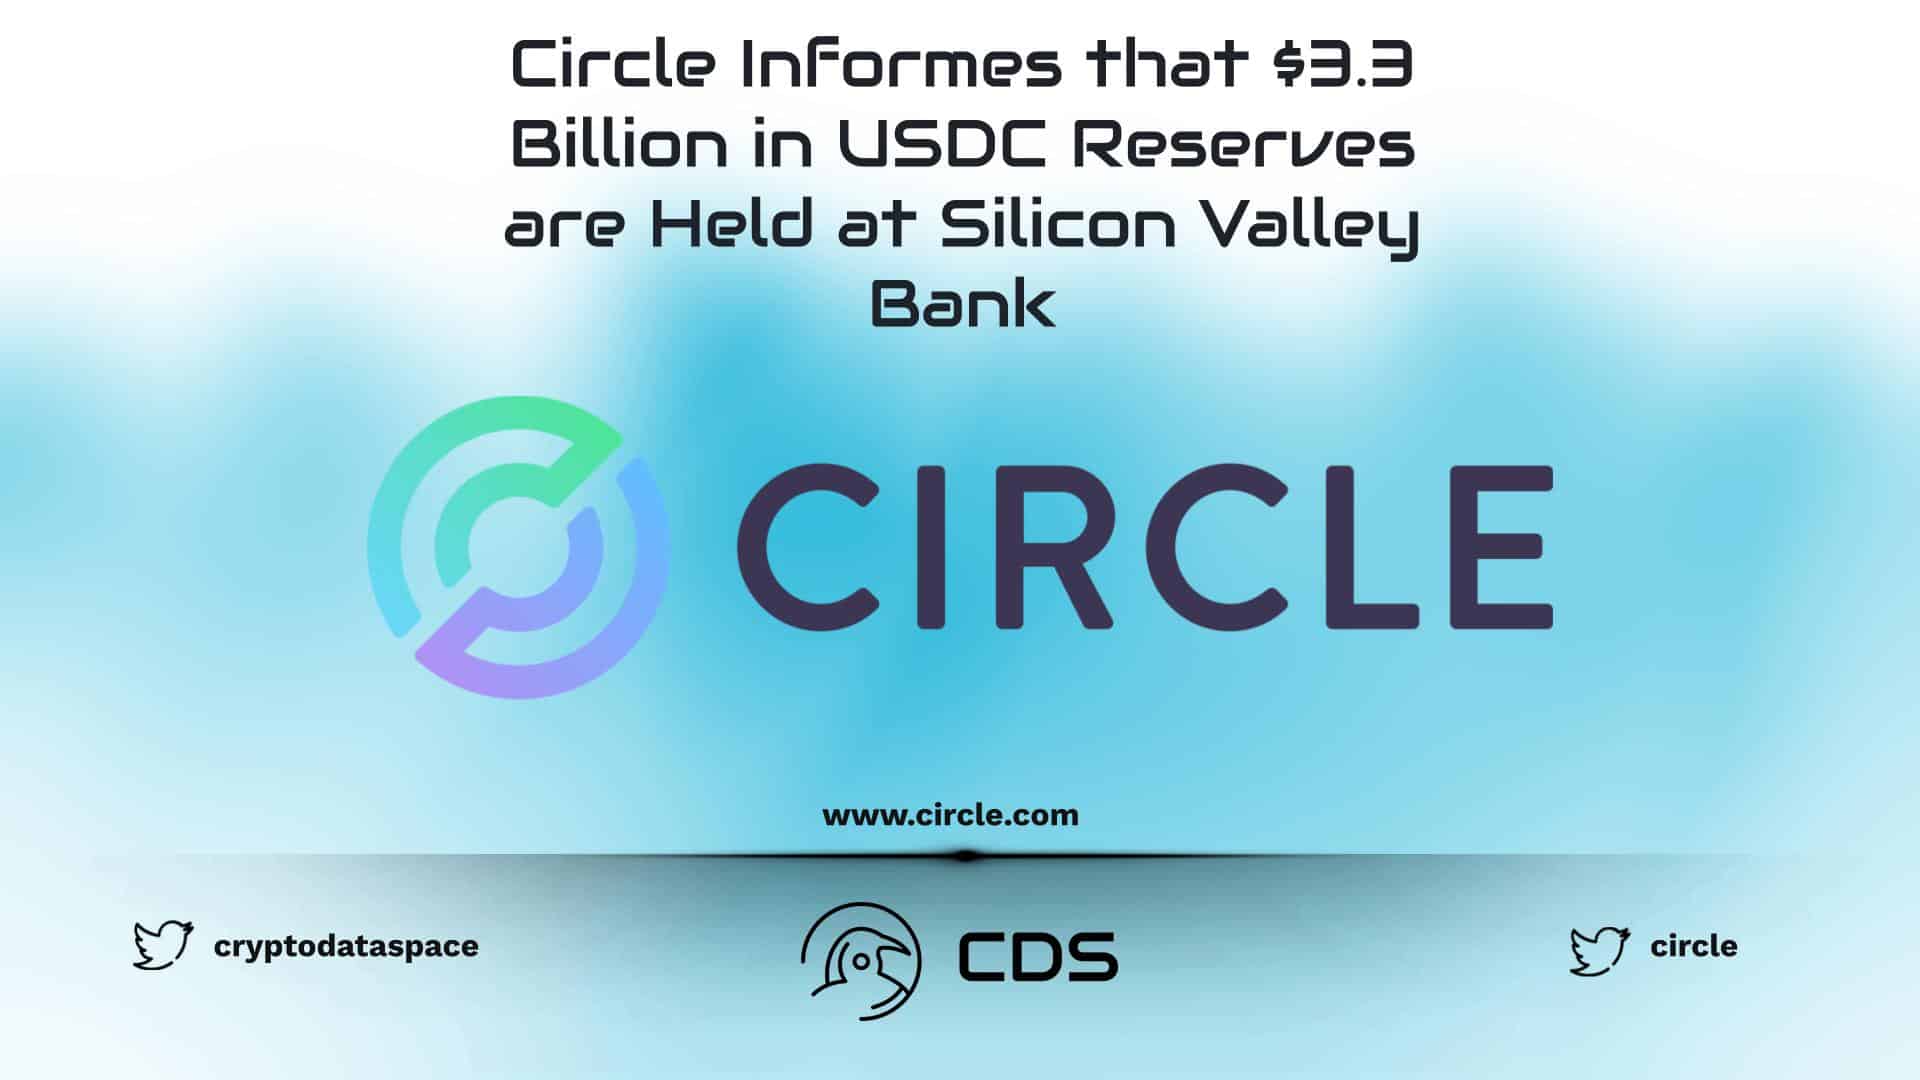 Circle Informes that $3.3 Billion in USDC Reserves are Held at Silicon Valley Bank